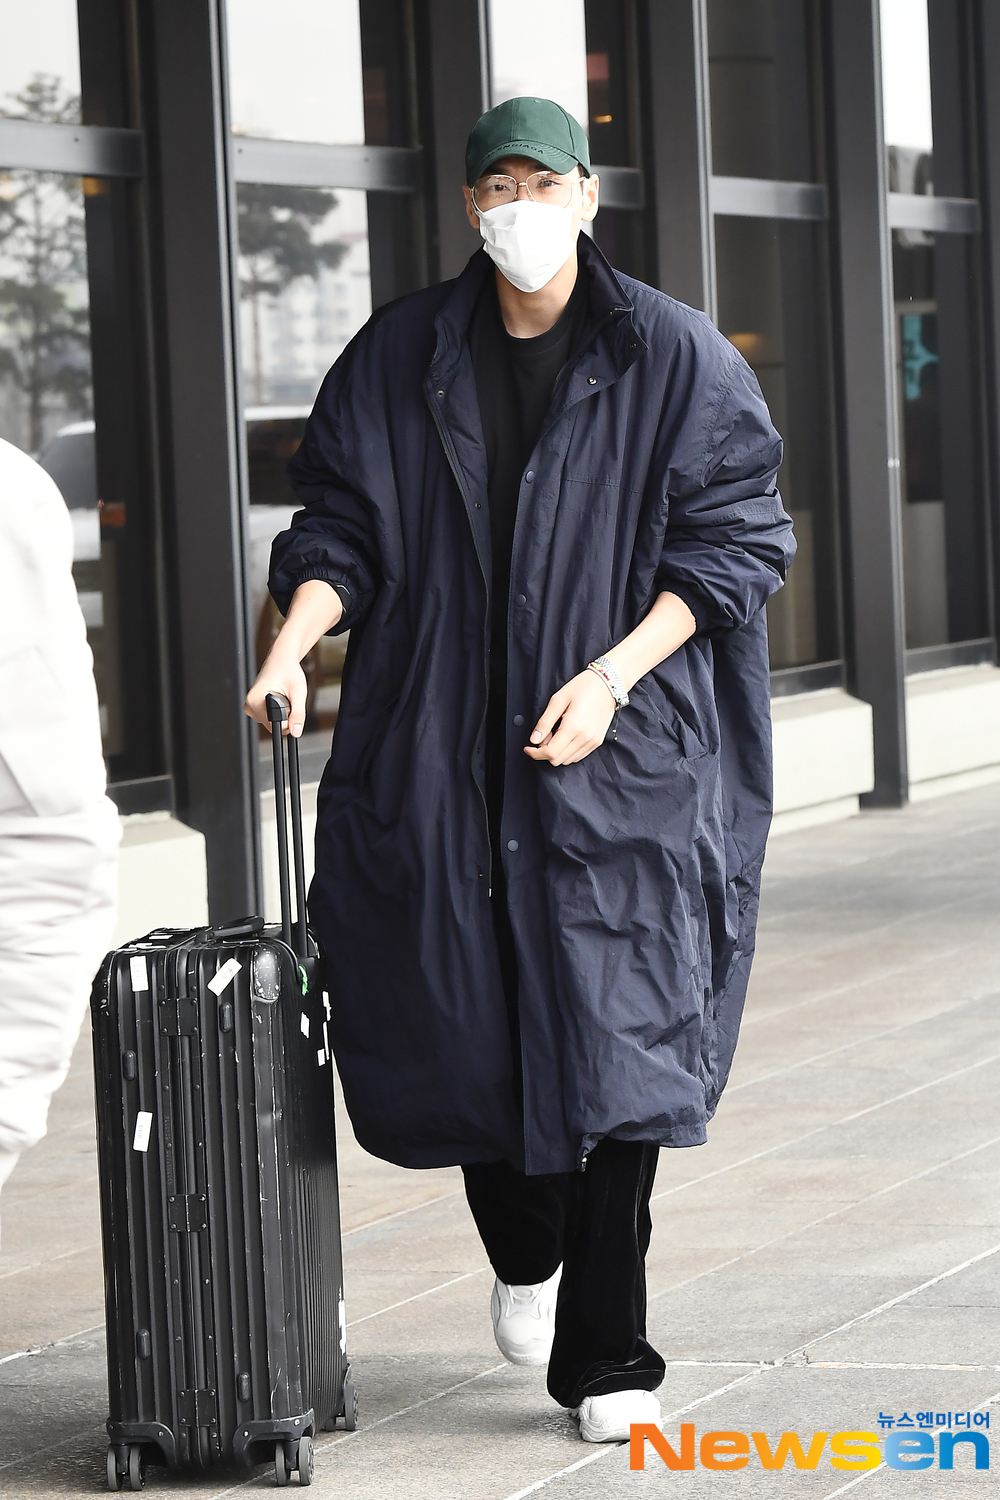 Actor Kim Young-kwang left for Tokyo Haneda to attend the first anniversary party of KIM YOUNG KWANG JAPAN OFFICIAL FANCLUB held in Tokyo, Japan through Gimpo International Airport in Banghwa-dong, Gangseo-gu, Seoul on March 15th.Actor Kim Young-kwang is leaving for Haneda, Tokyo, showing off his airport fashion.exponential earthquake